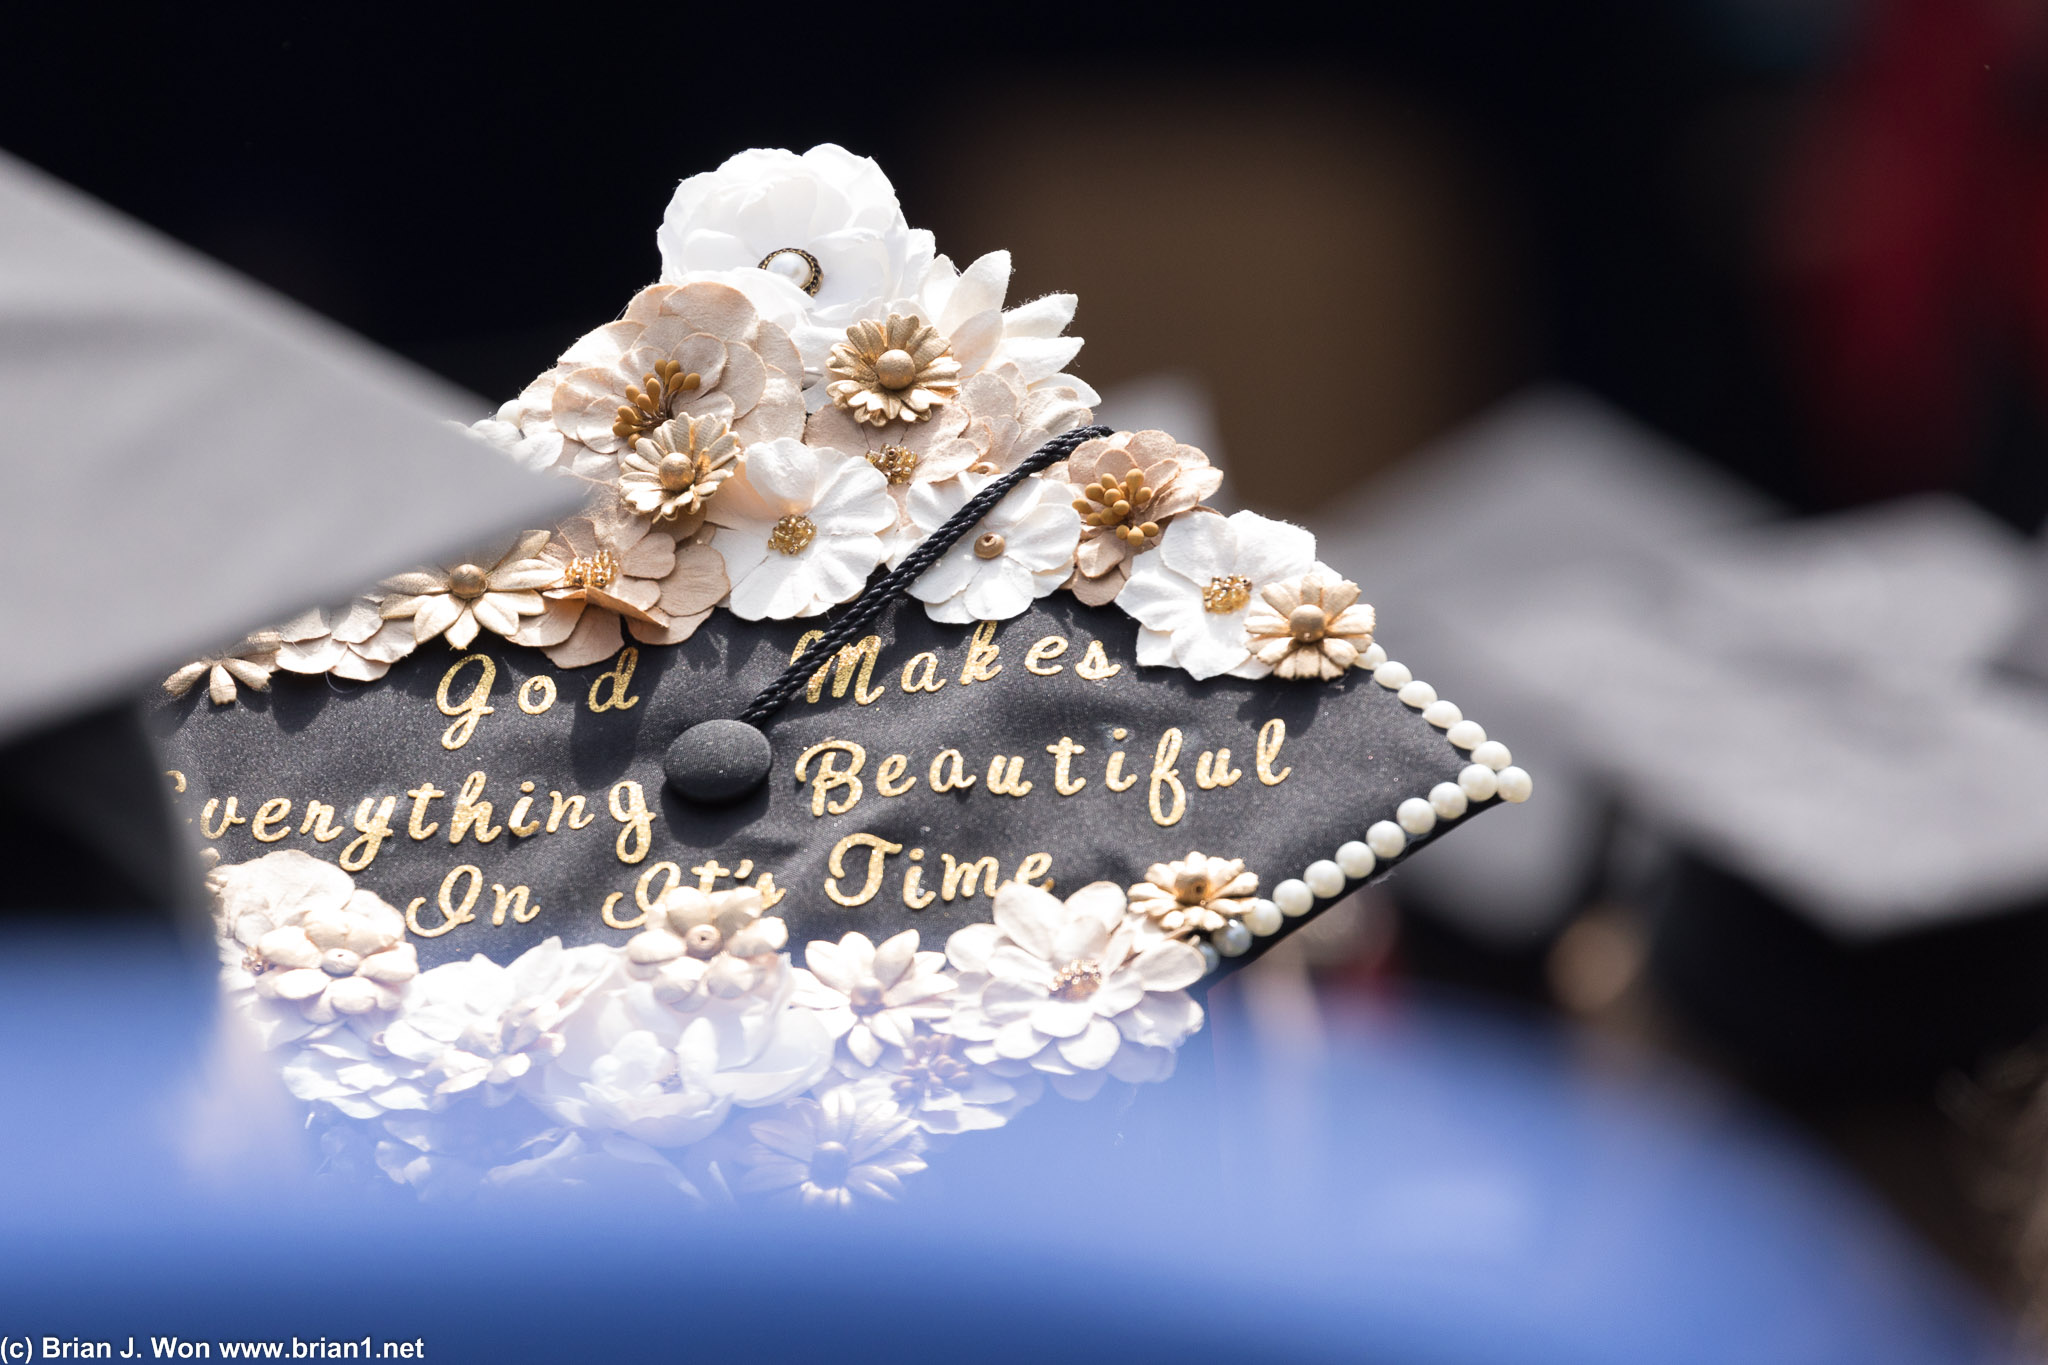 Decorated mortarboard.